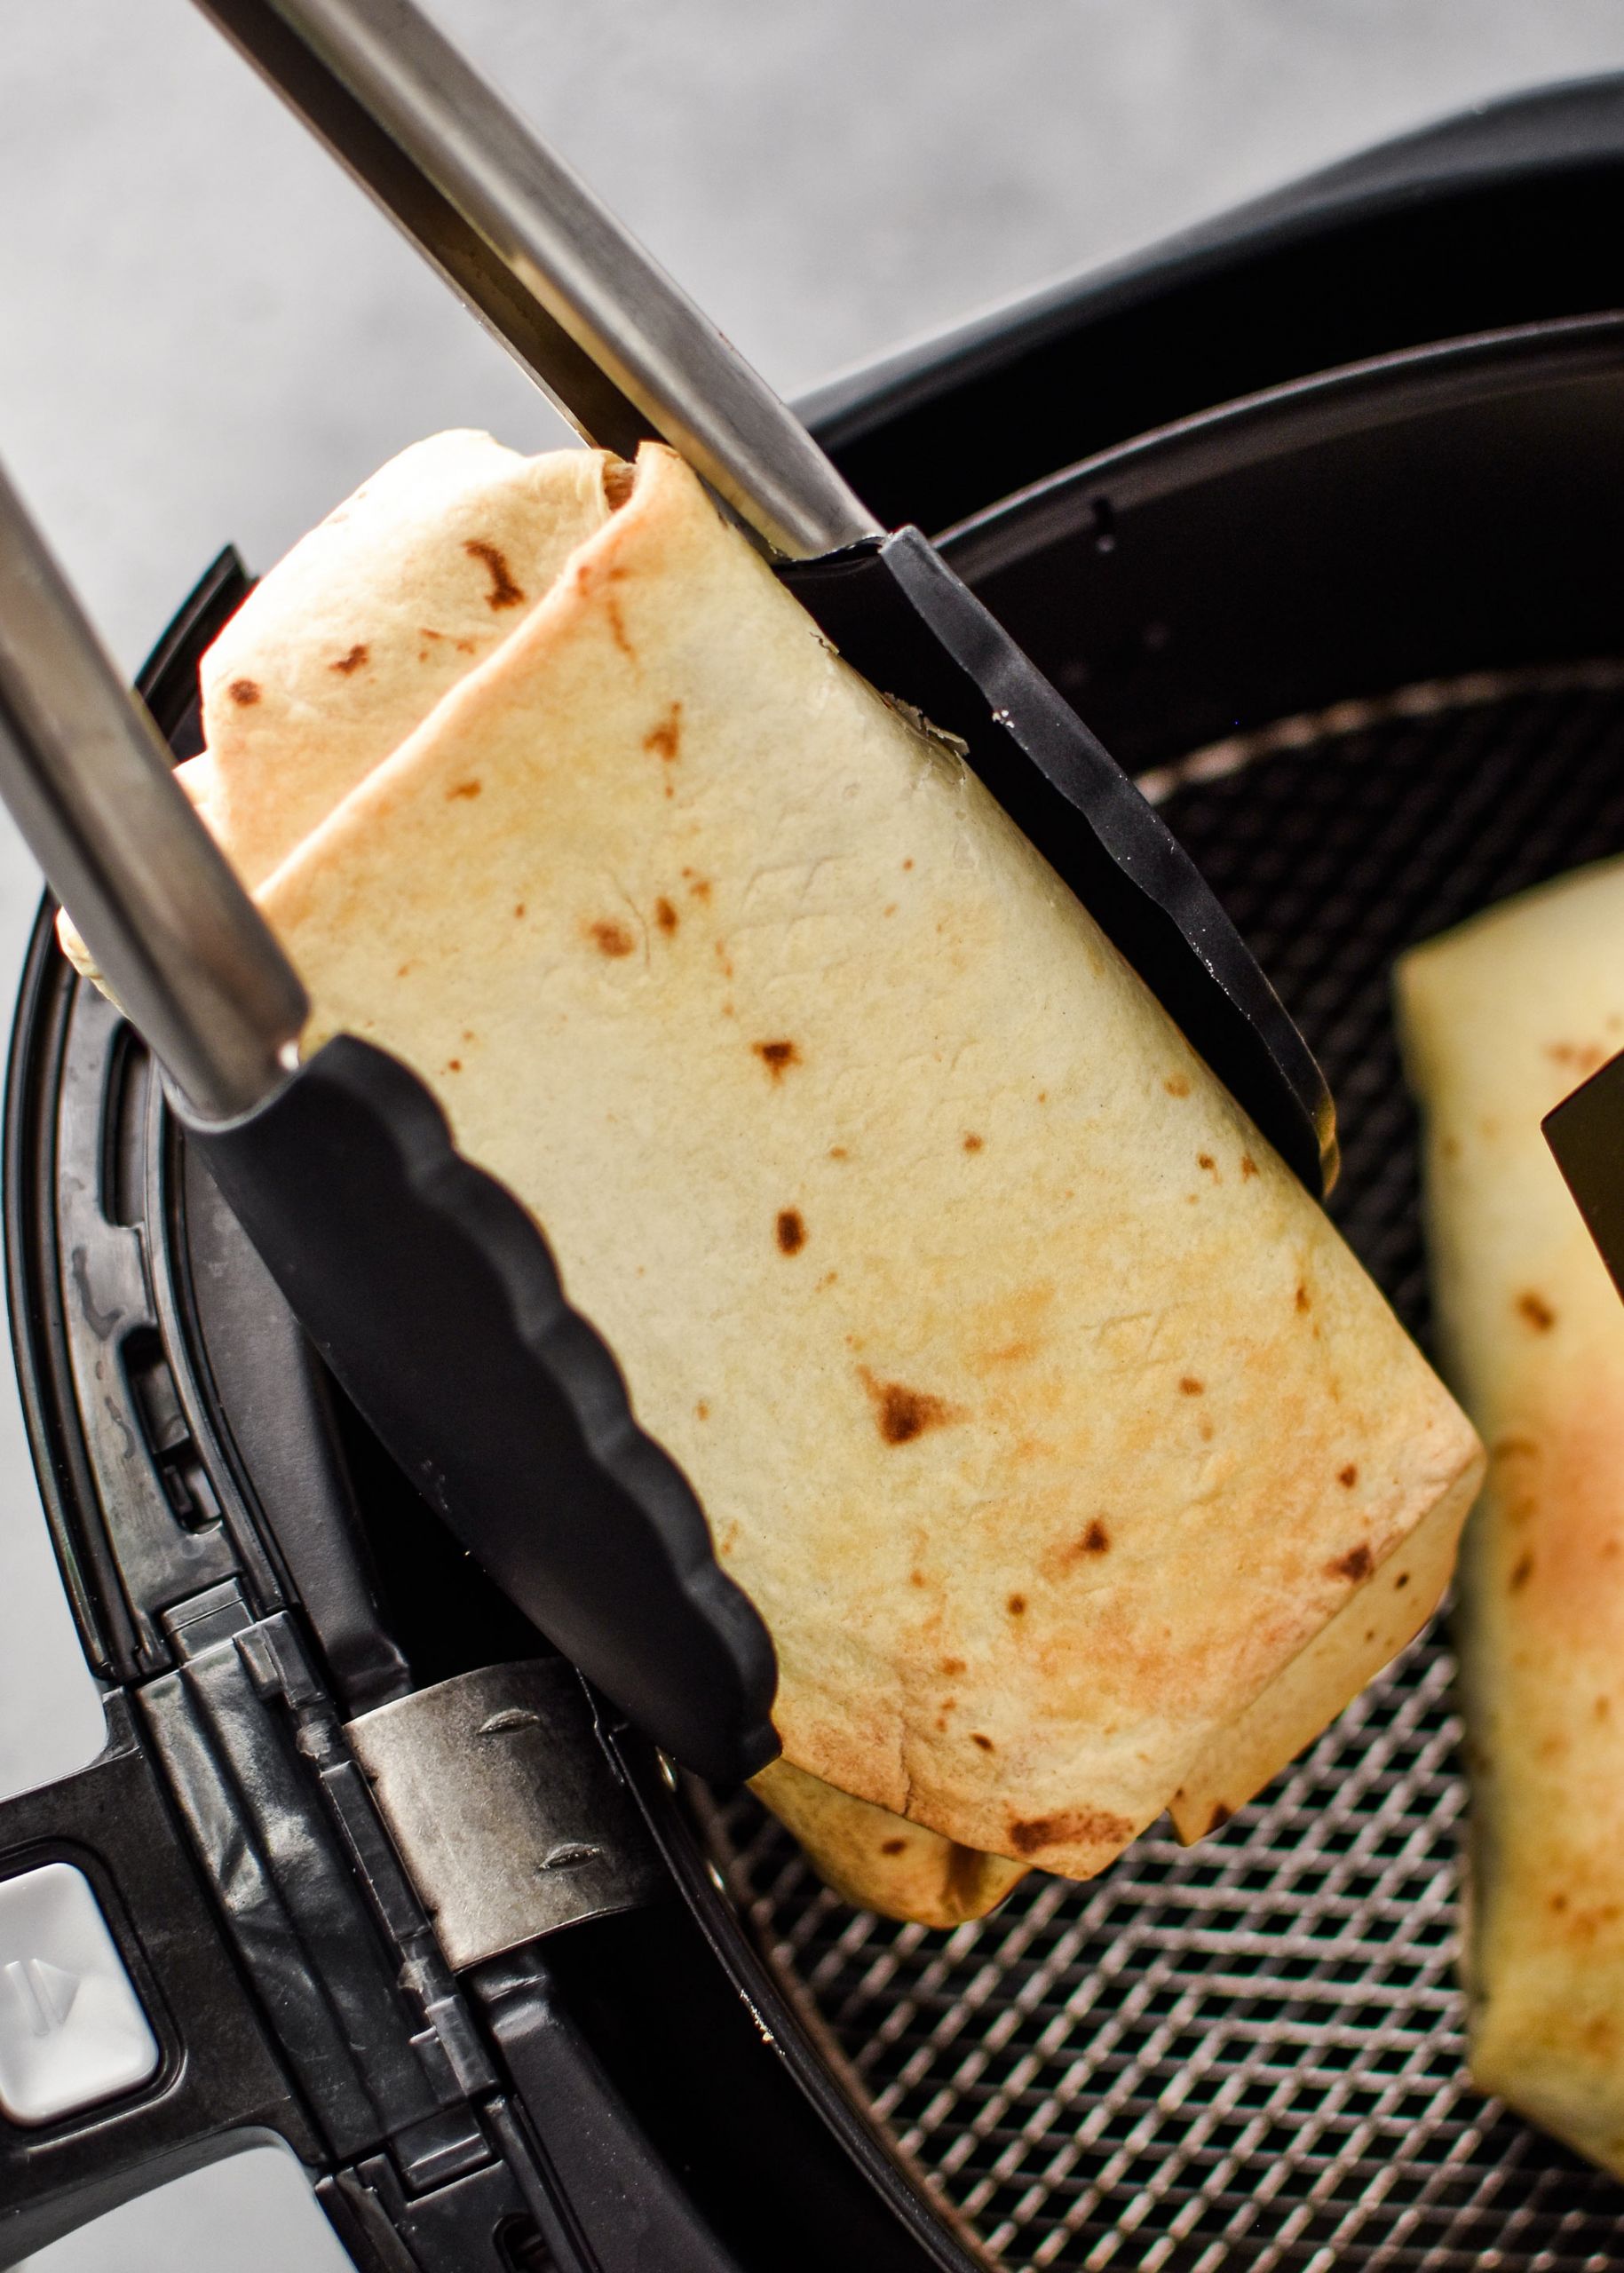 Frozen Burritos In Air Fryer
 How to Make Chimichangas in an Air Fryer Project Meal Plan